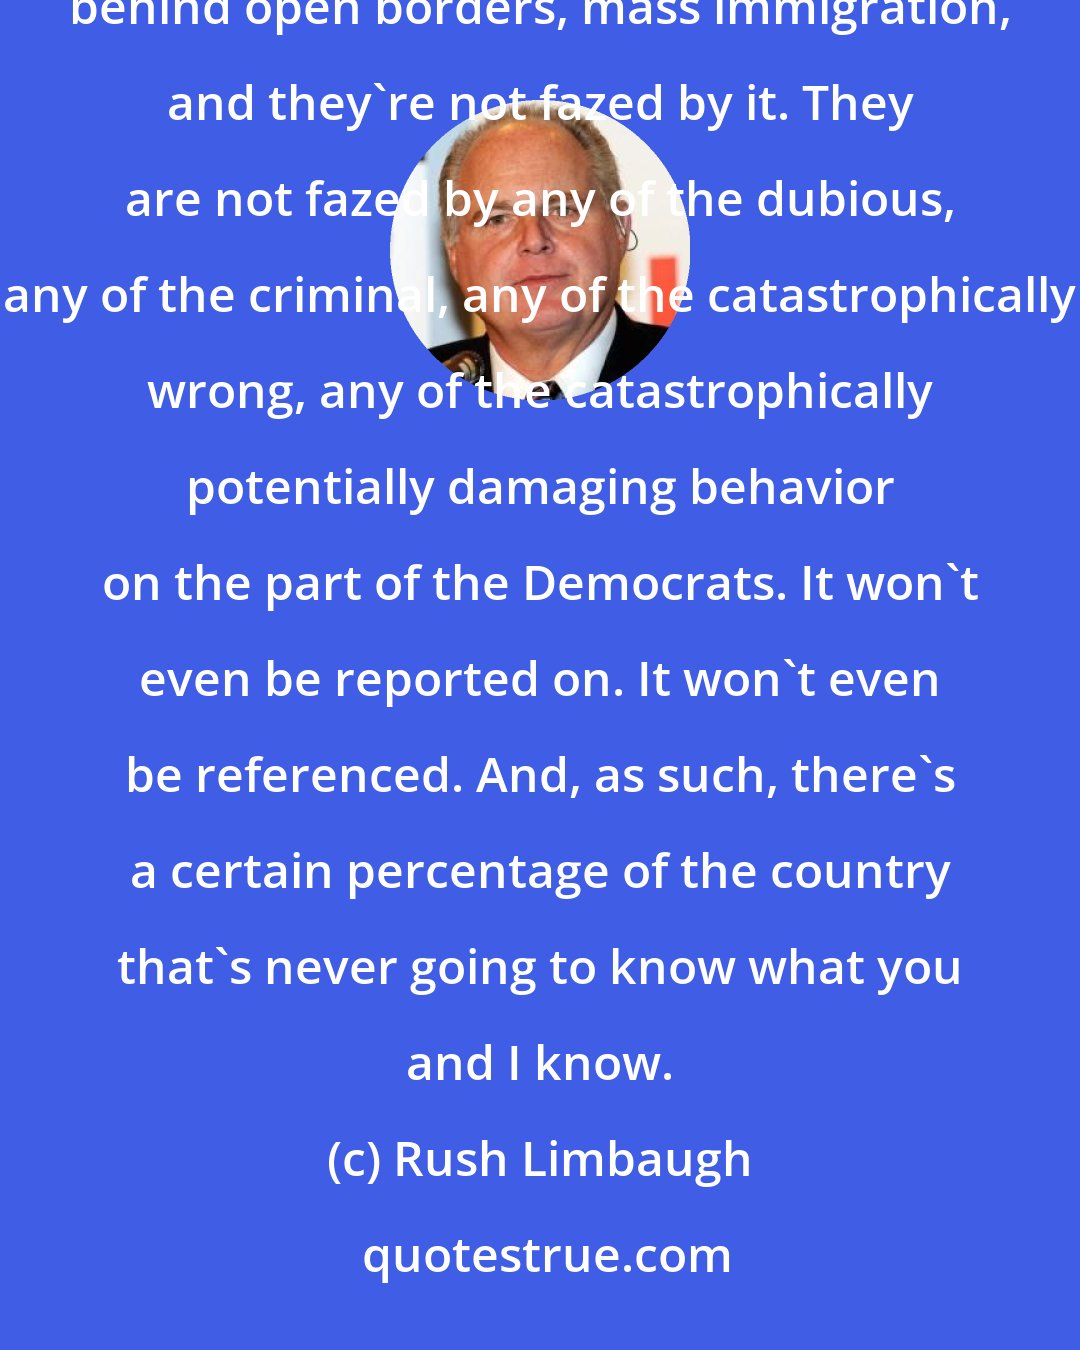 Rush Limbaugh: You have this giant institution called the United States media that was fully aware of the real reason behind open borders, mass immigration, and they're not fazed by it. They are not fazed by any of the dubious, any of the criminal, any of the catastrophically wrong, any of the catastrophically potentially damaging behavior on the part of the Democrats. It won't even be reported on. It won't even be referenced. And, as such, there's a certain percentage of the country that's never going to know what you and I know.